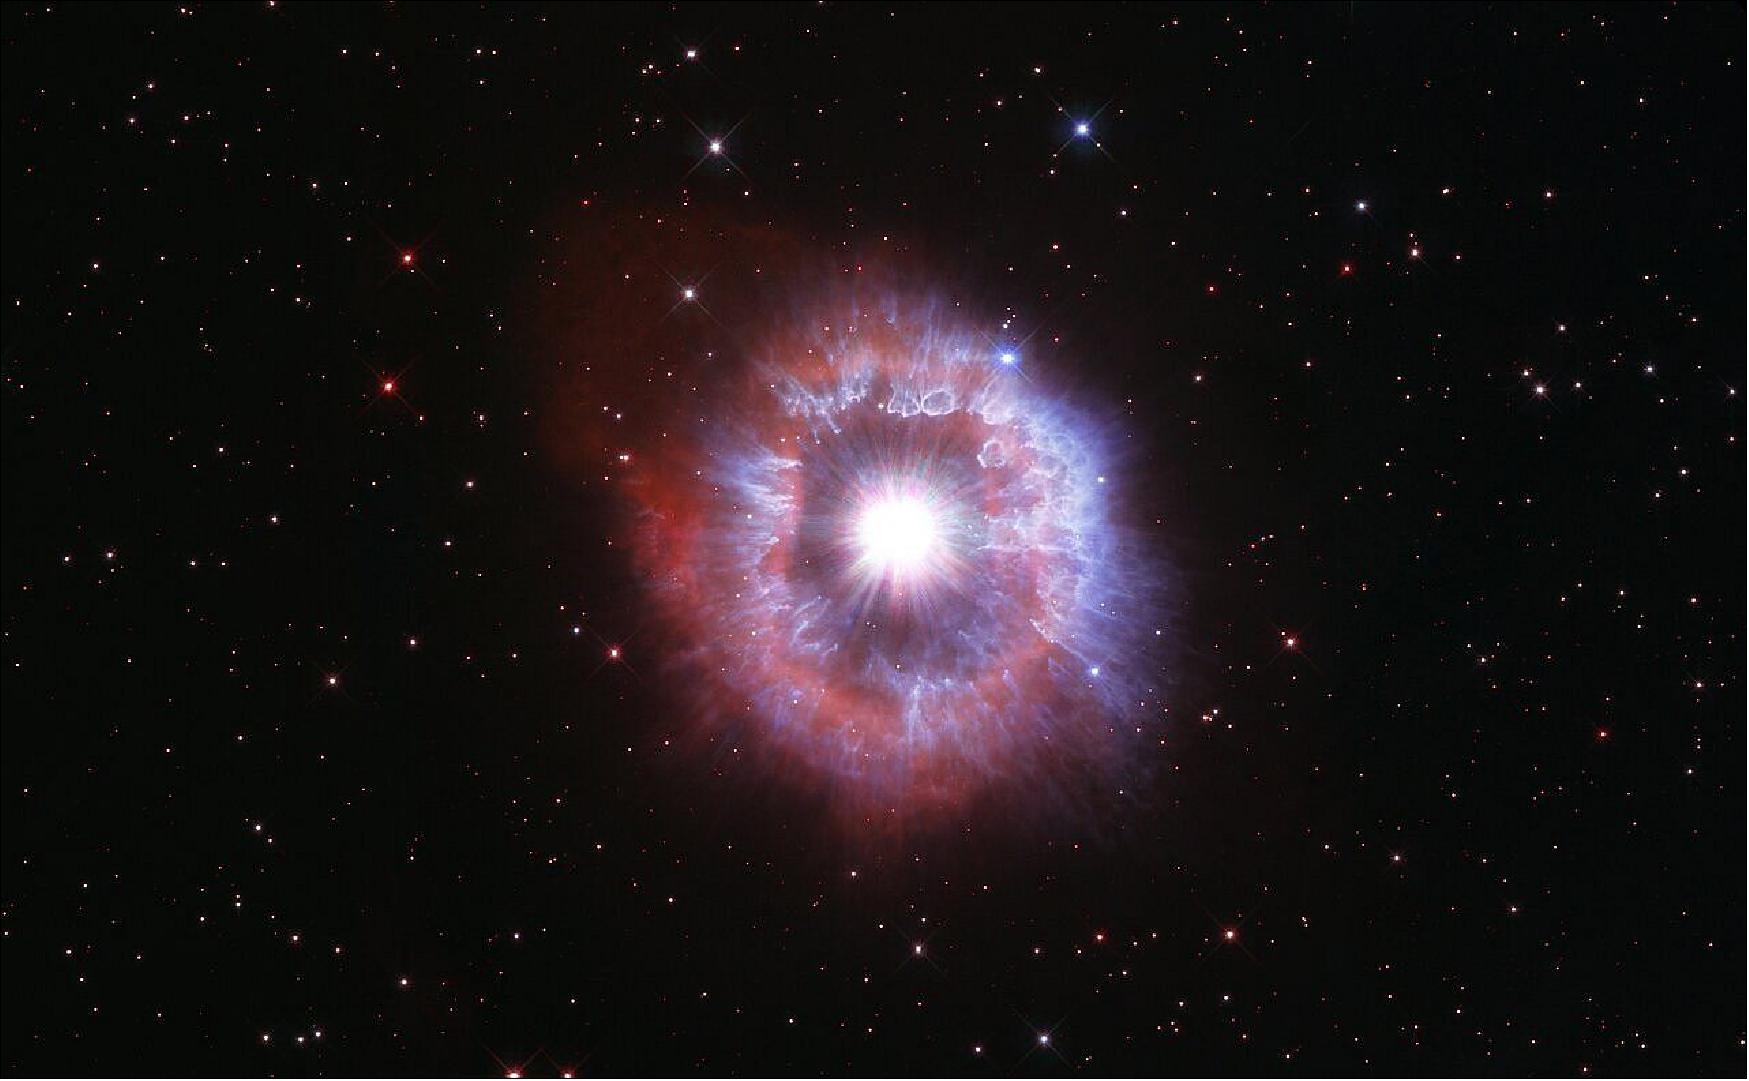 Figure 93: In celebration of the 31st anniversary of the launch of the NASA/ESA Hubble Space Telescope, astronomers aimed the celebrated observatory at one of the brightest stars seen in our galaxy to capture its beauty. The image was taken in visible and ultraviolet light. Hubble is ideally suited for observations in ultraviolet light because this wavelength range can only be viewed from space (image credit: NASA, ESA and STScI)